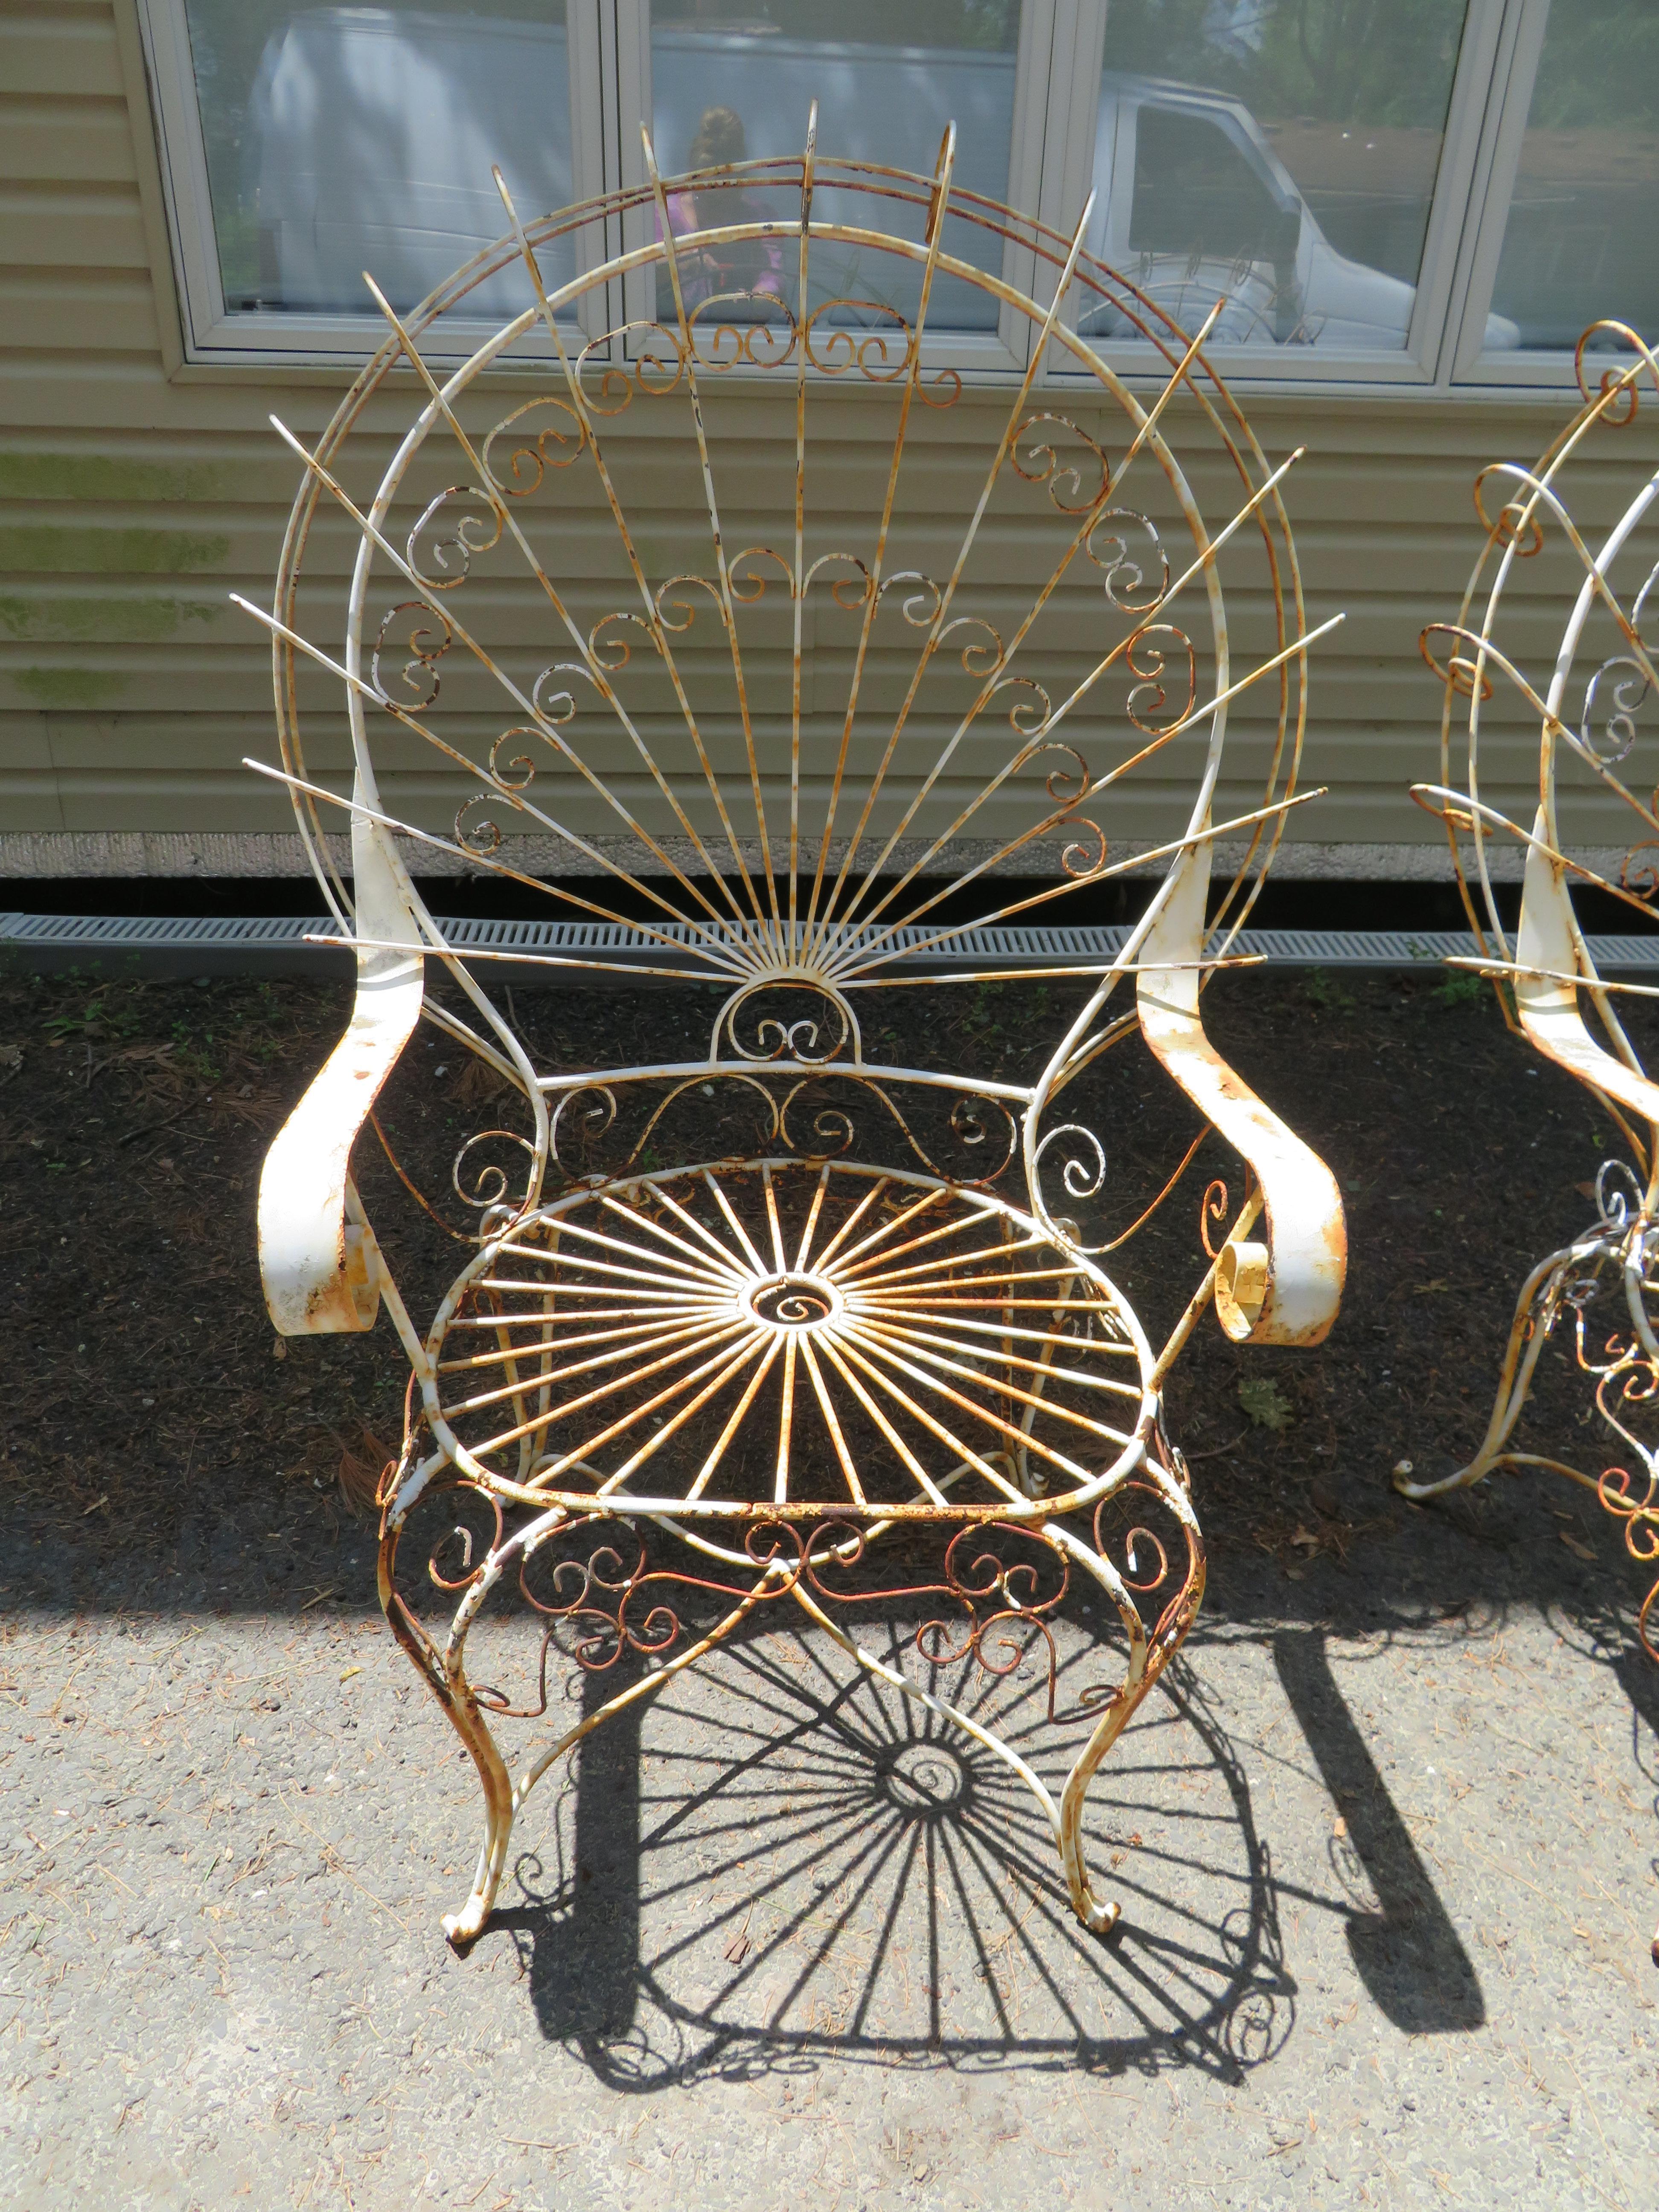 Charming pair 1960s John Salterini vintage midcentury wrought iron wire peacock chairs.
Victorian style chairs designed with a back pattern reminiscent of a peacock age appropriate patina. Please see our huge selection of other pieces from this